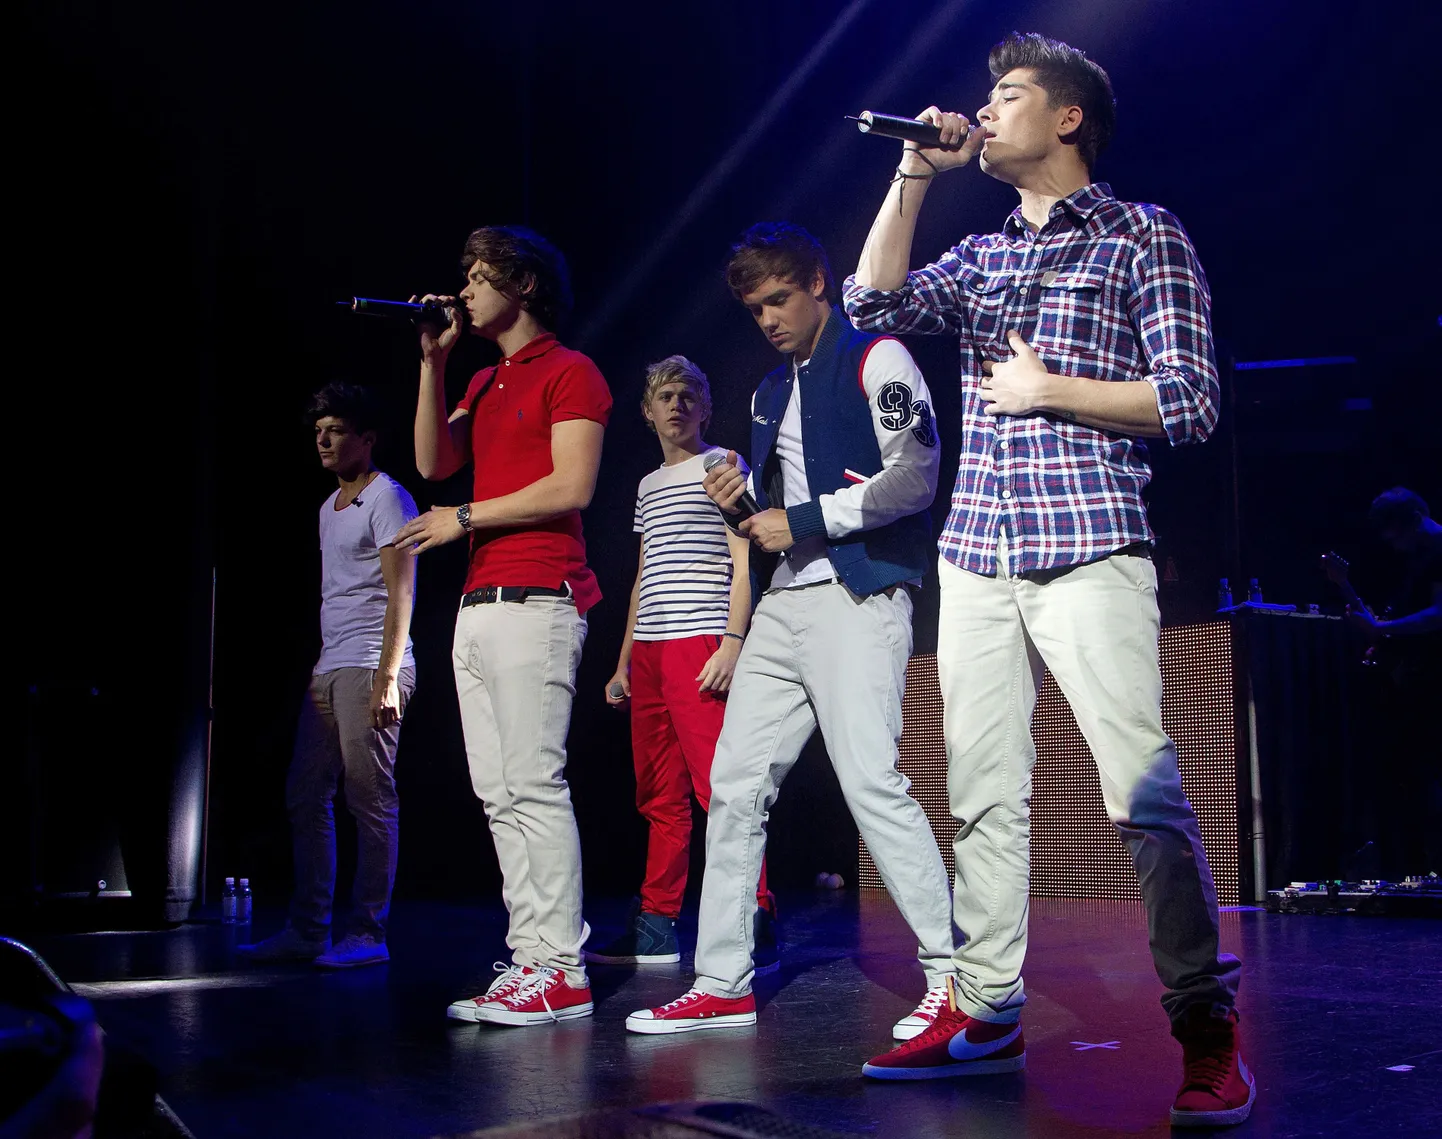 (From R to L) Zayn Malik, Liam Payne, Niall Horan, Louis Tomlinson and Harry Styles of the British-Irish boy band One Direction performs during the group's concert at the St James theatre in Wellington on April 21, 2012. One Direction comprise of four young Britons and an Irishman, with their first album making its debut at number one on the US charts last month -- a feat never before achieved by a British band.      AFP PHOTO / MARTY MELVILLE